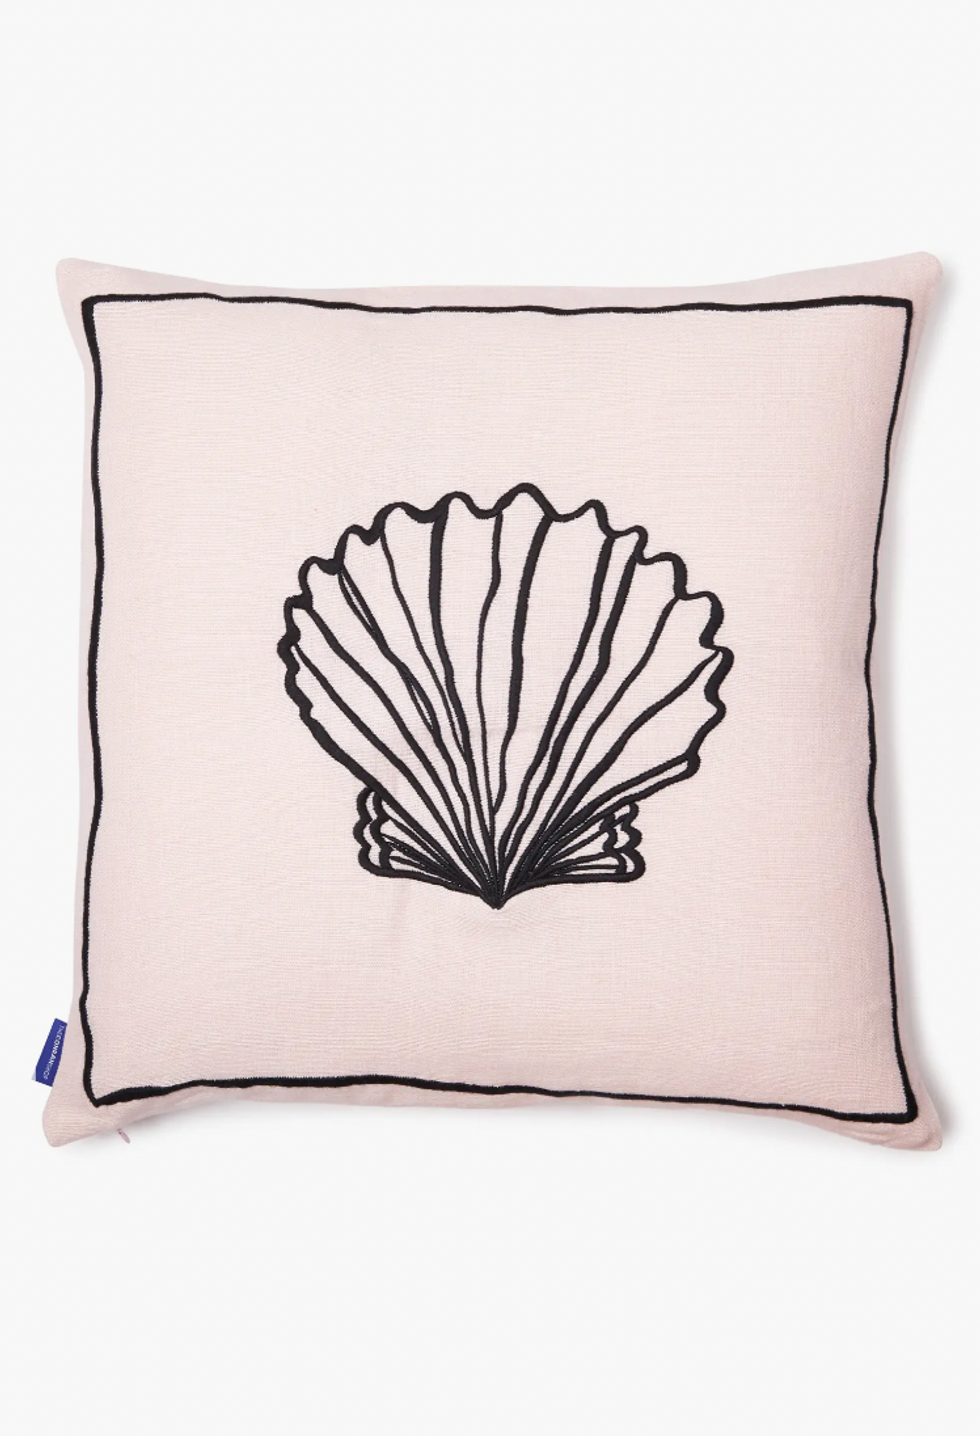 Pillow Shell Under the Sea Embroidered Accent Pillow The Conran Shop